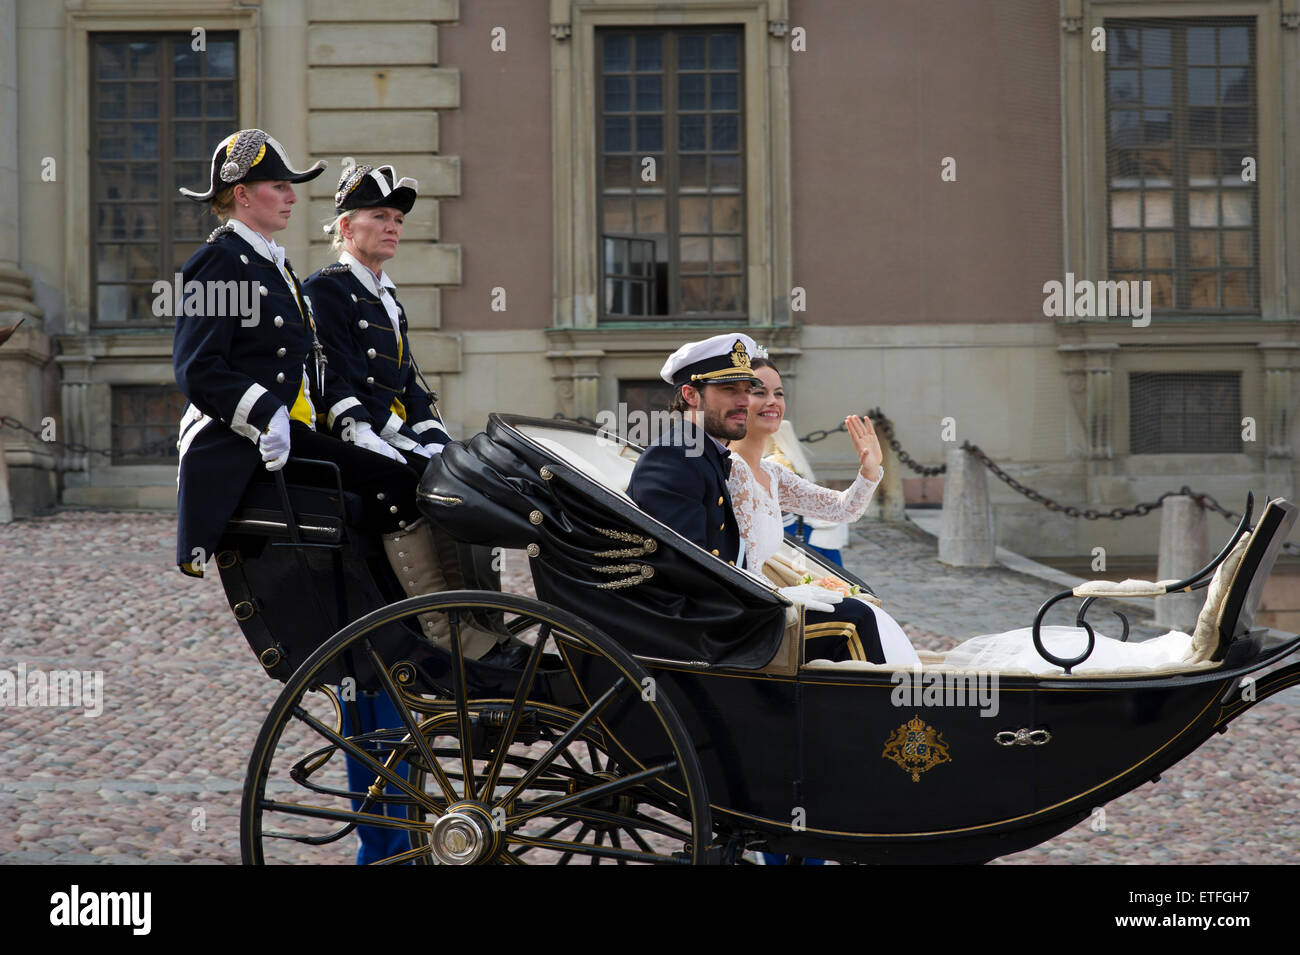 Stockholm, Sweden, June 13, 2015. The wedding of HRH Prince Carl Philip and Princess Sofia, Sweden. HRH Prince Carl Philip and Princess Sofia are leaving the Royal chapel by carriage. The cortege goes through Stockholm. Credit:  Barbro Bergfeldt/Alamy Live News Stock Photo